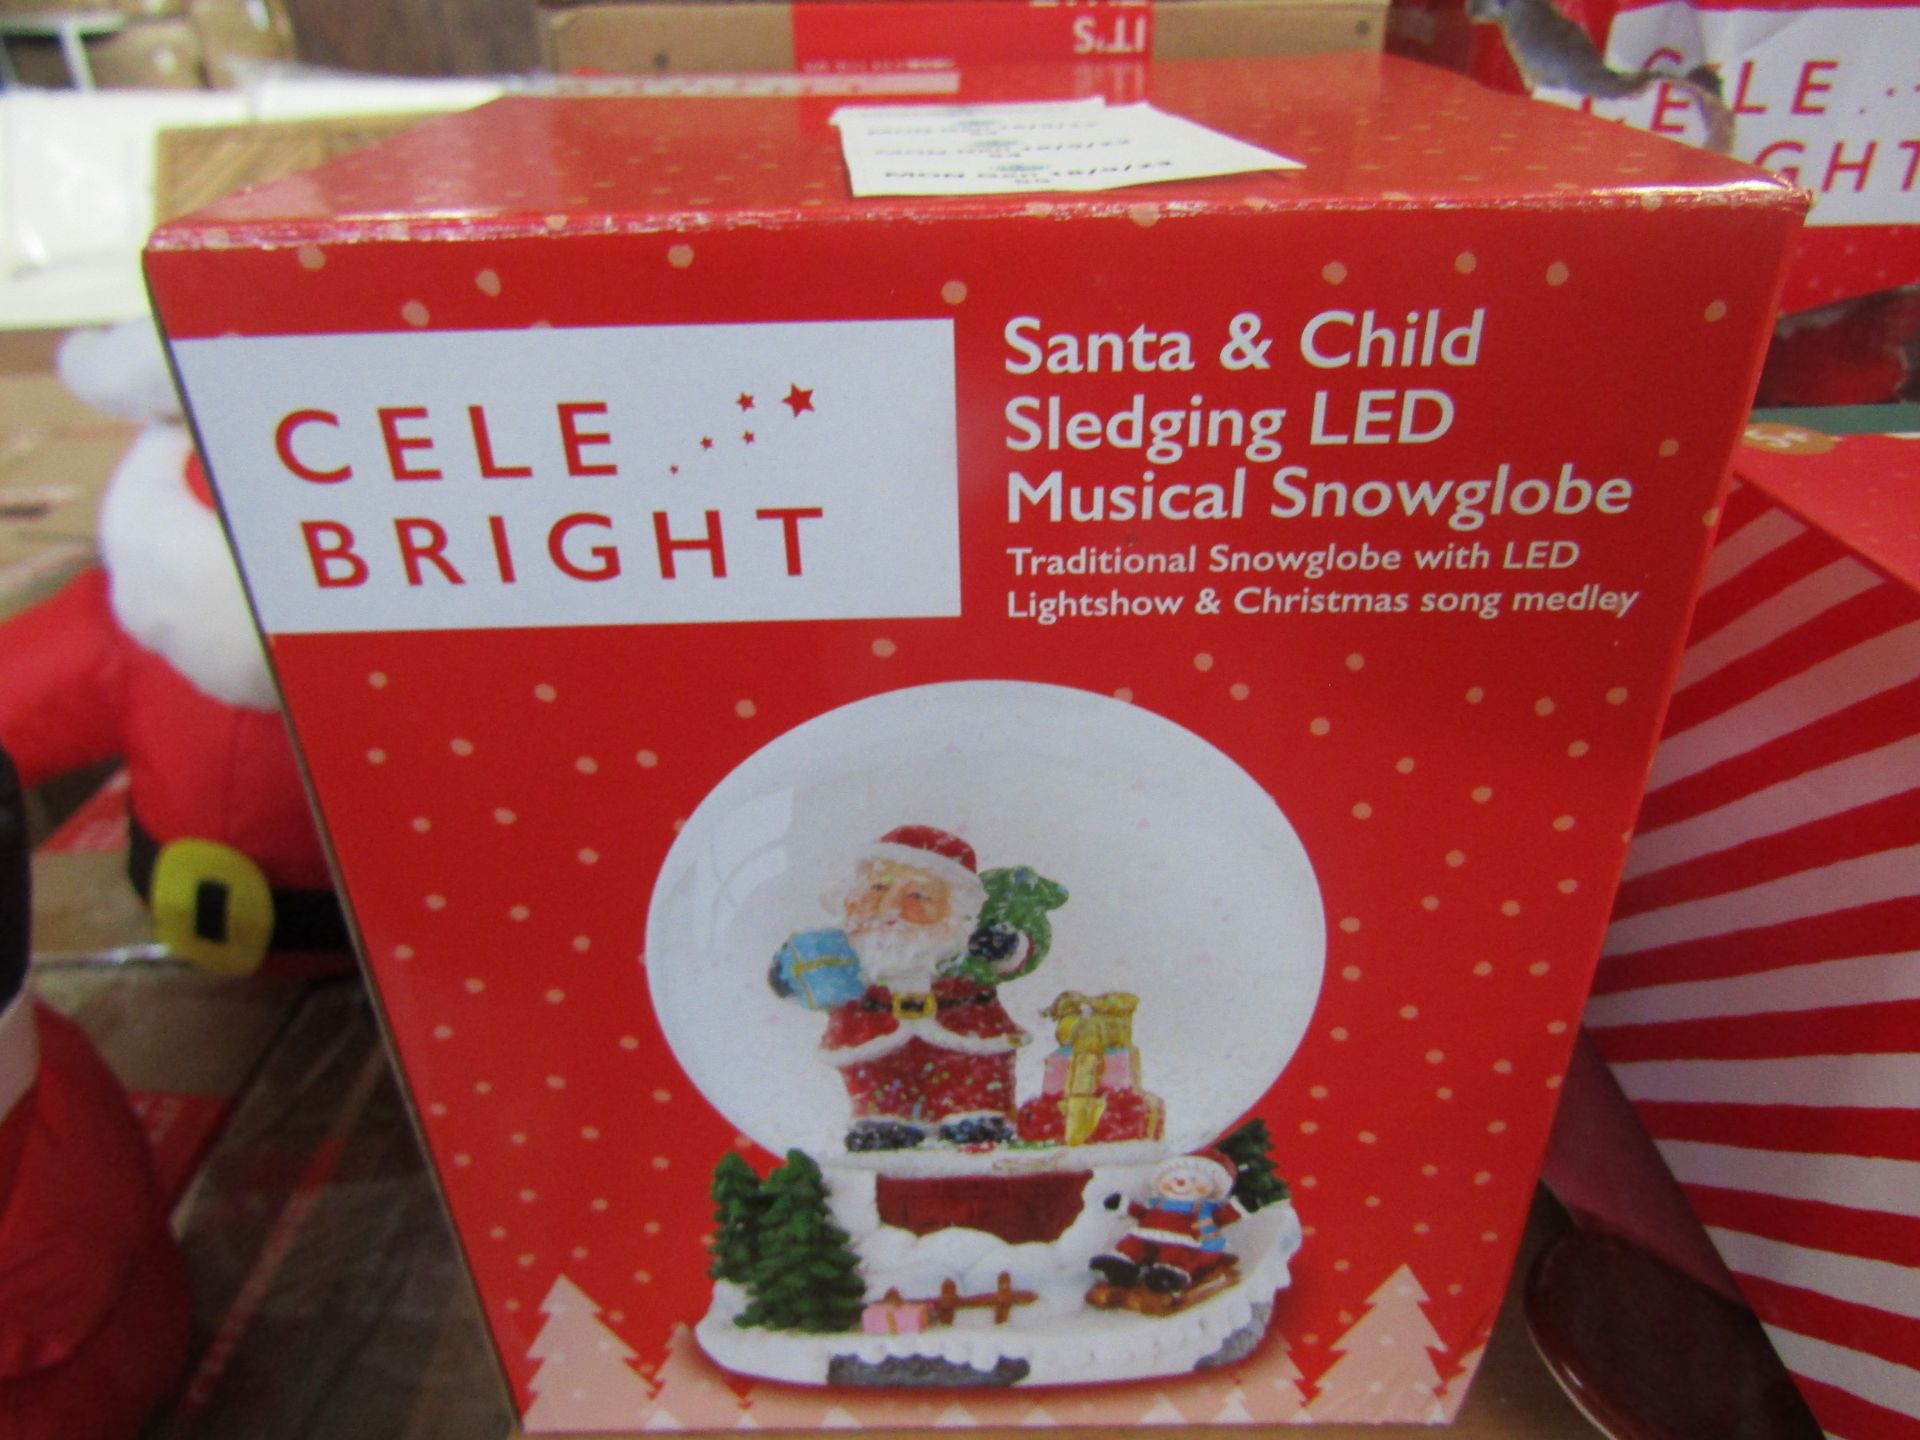 Celebright - Santa & Child Sledging LED Musical Snowglobe - Looks In Good Condition & Boxed.